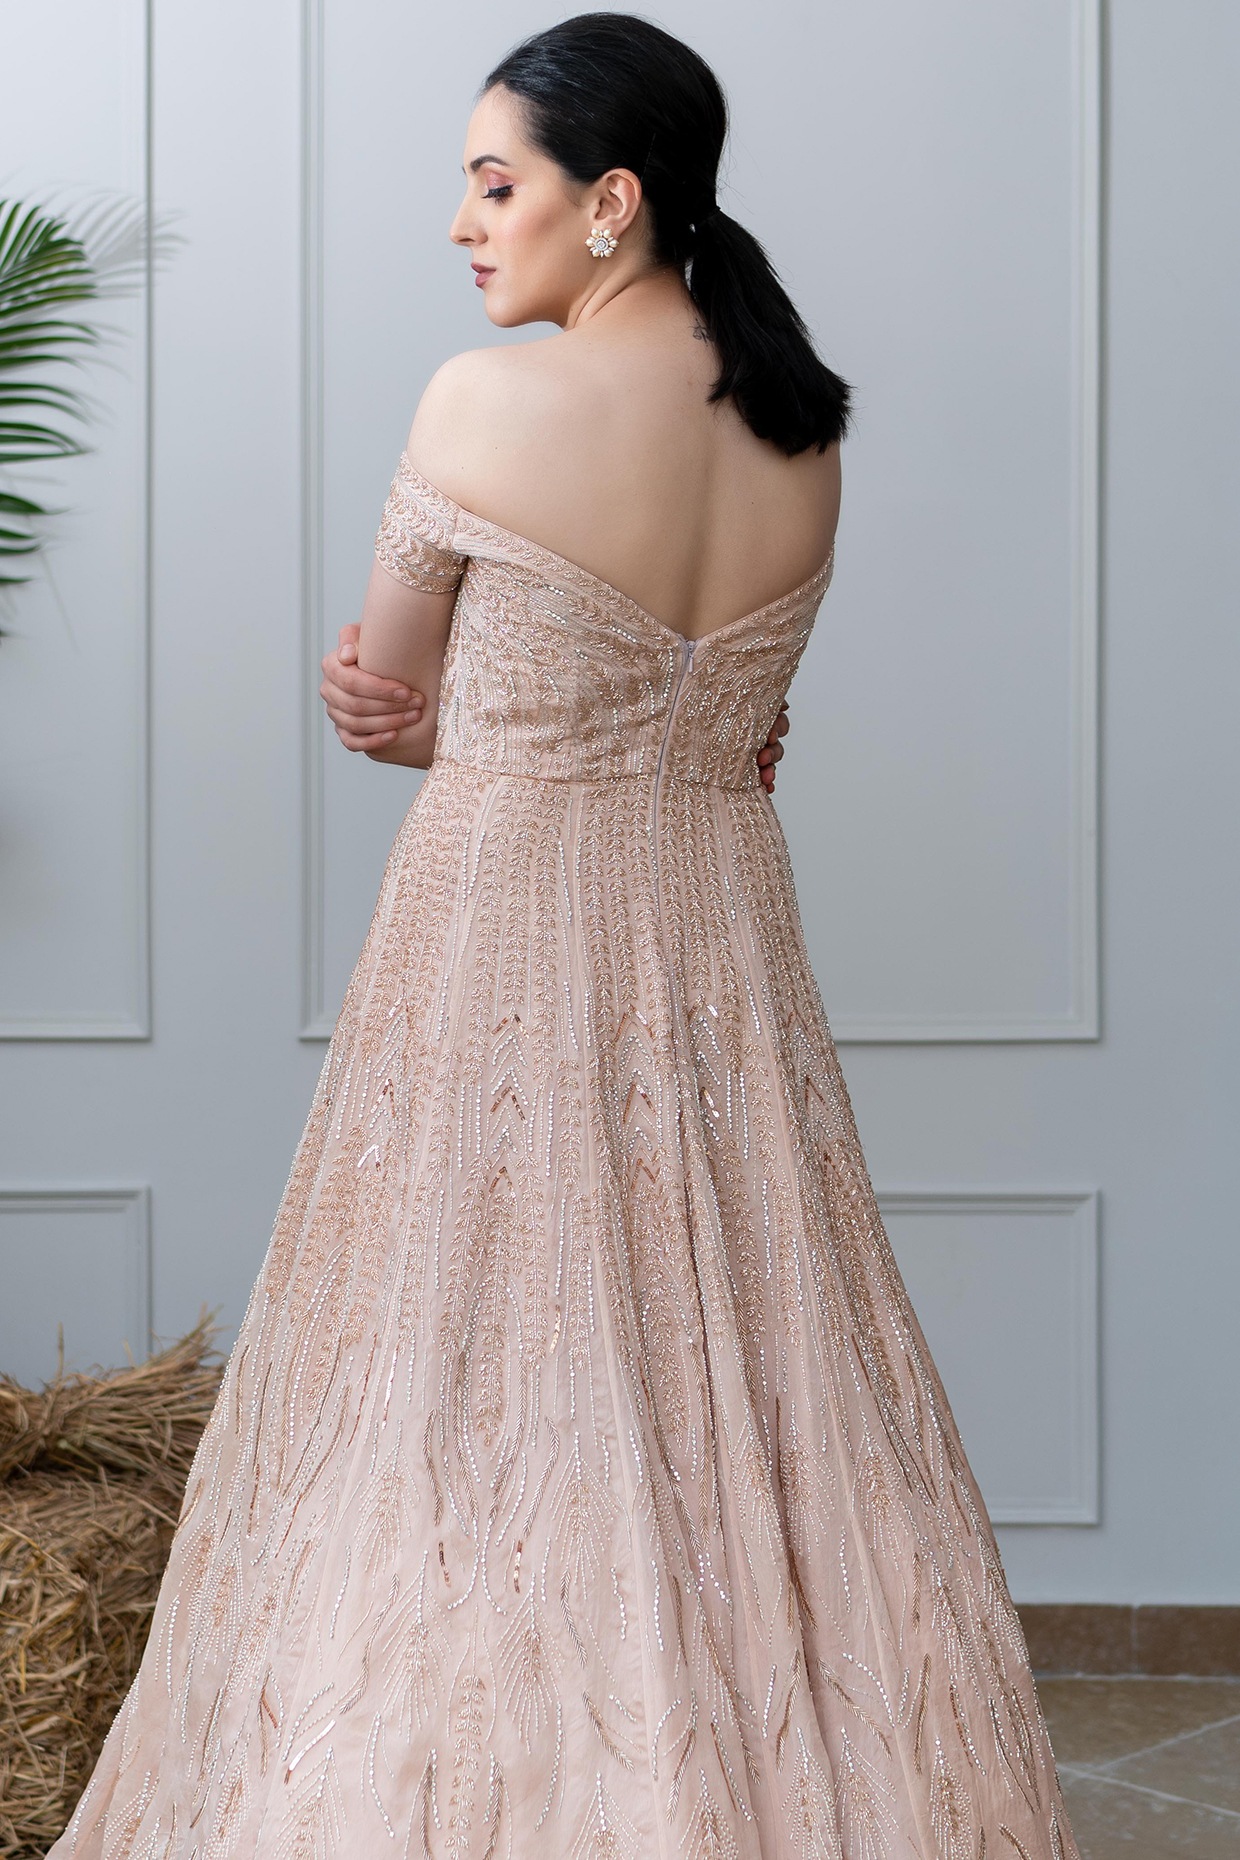 43 Gorgeous Off the Shoulder Wedding Dresses - hitched.co.uk - hitched.co.uk